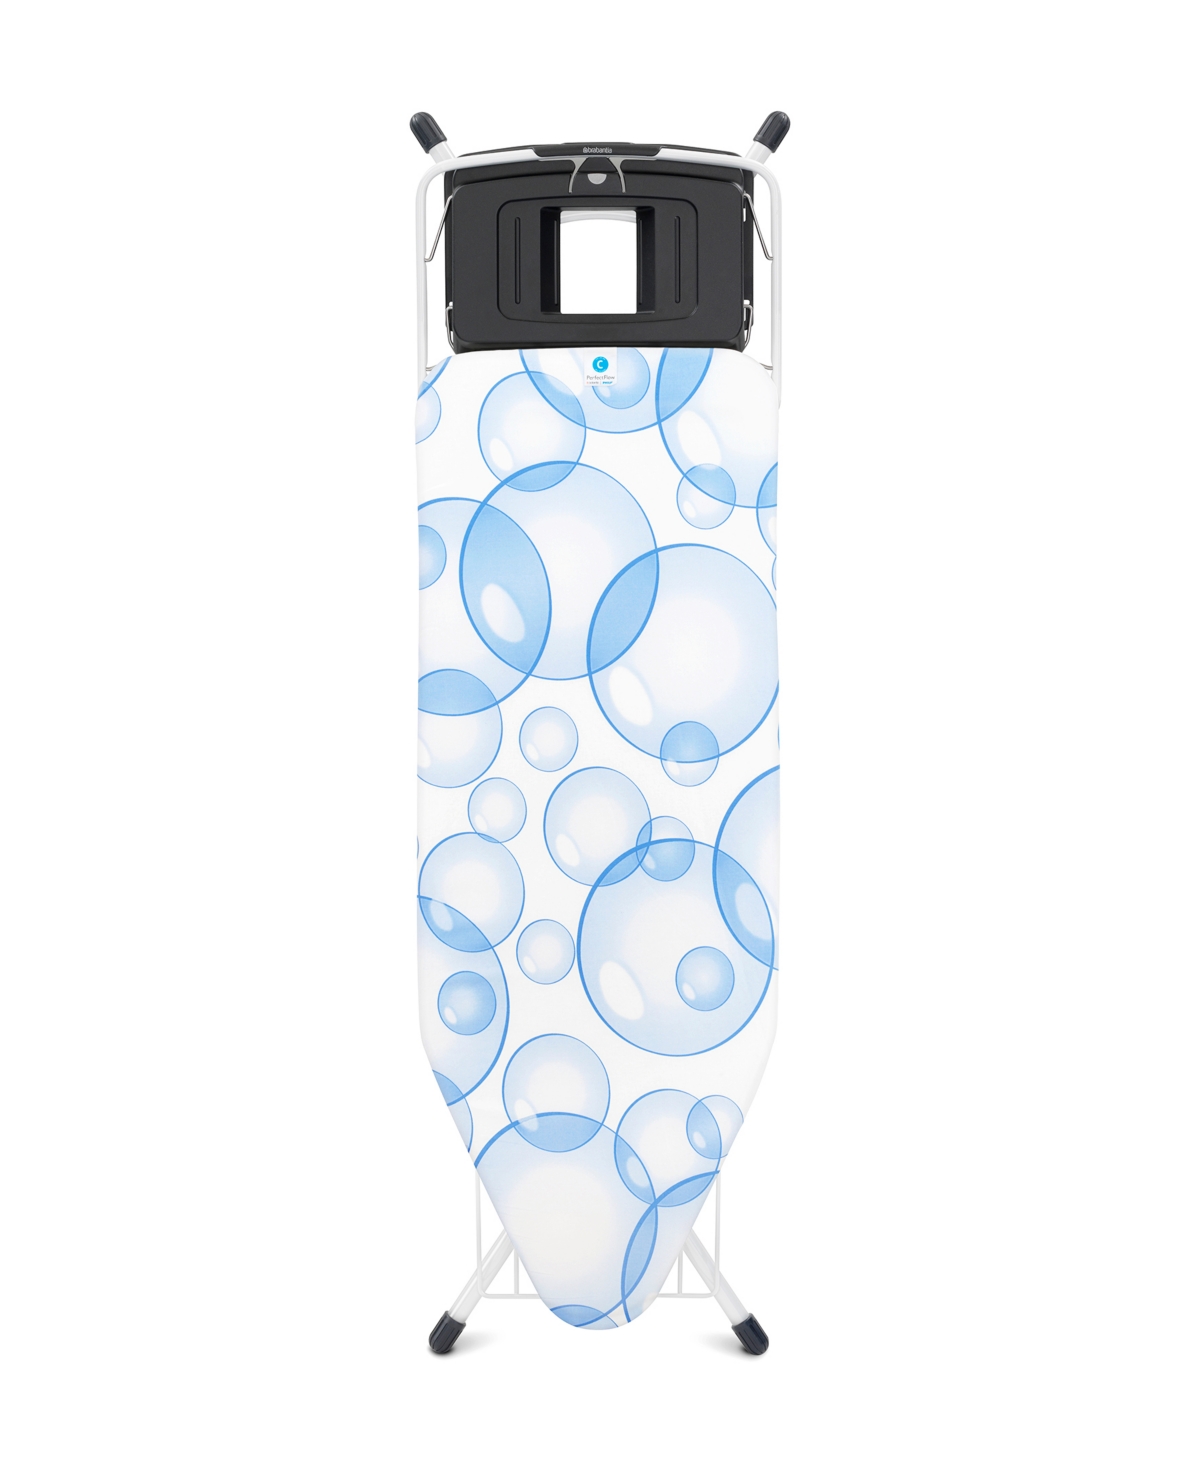 Brabantia Ironing Board With Foldable Steam Unit Holder, Perfectflow Cover And Bonus Foldable Linen Rack In Bubbles